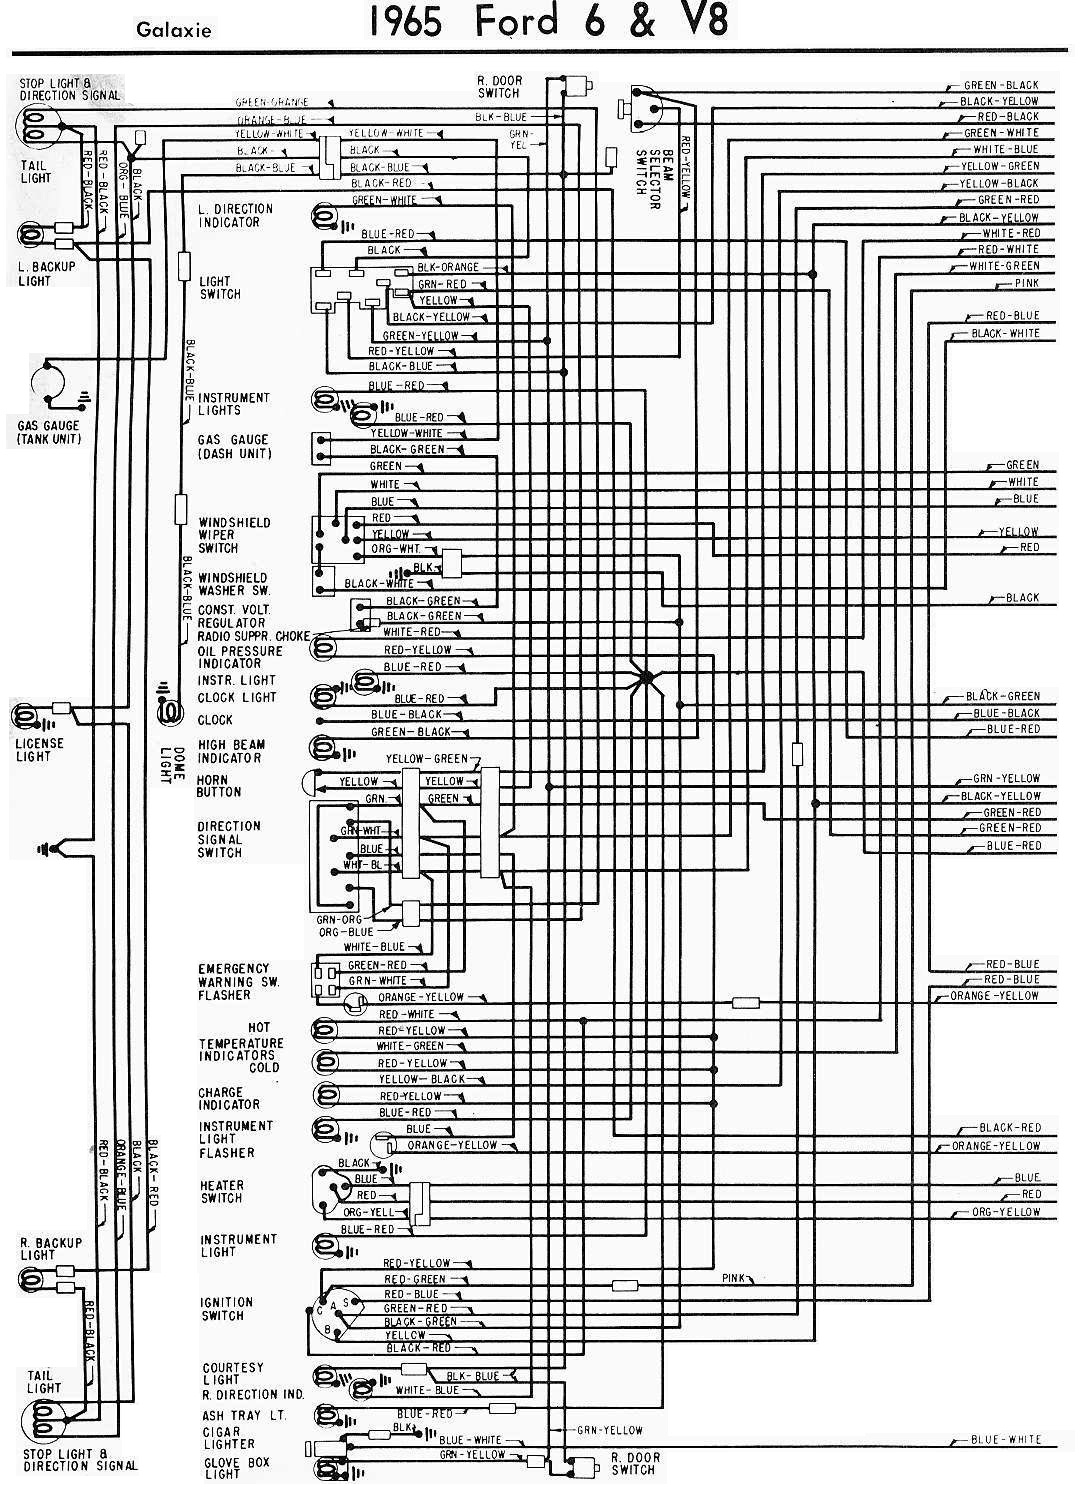 Wiring Diagram For A Ford from 3.bp.blogspot.com